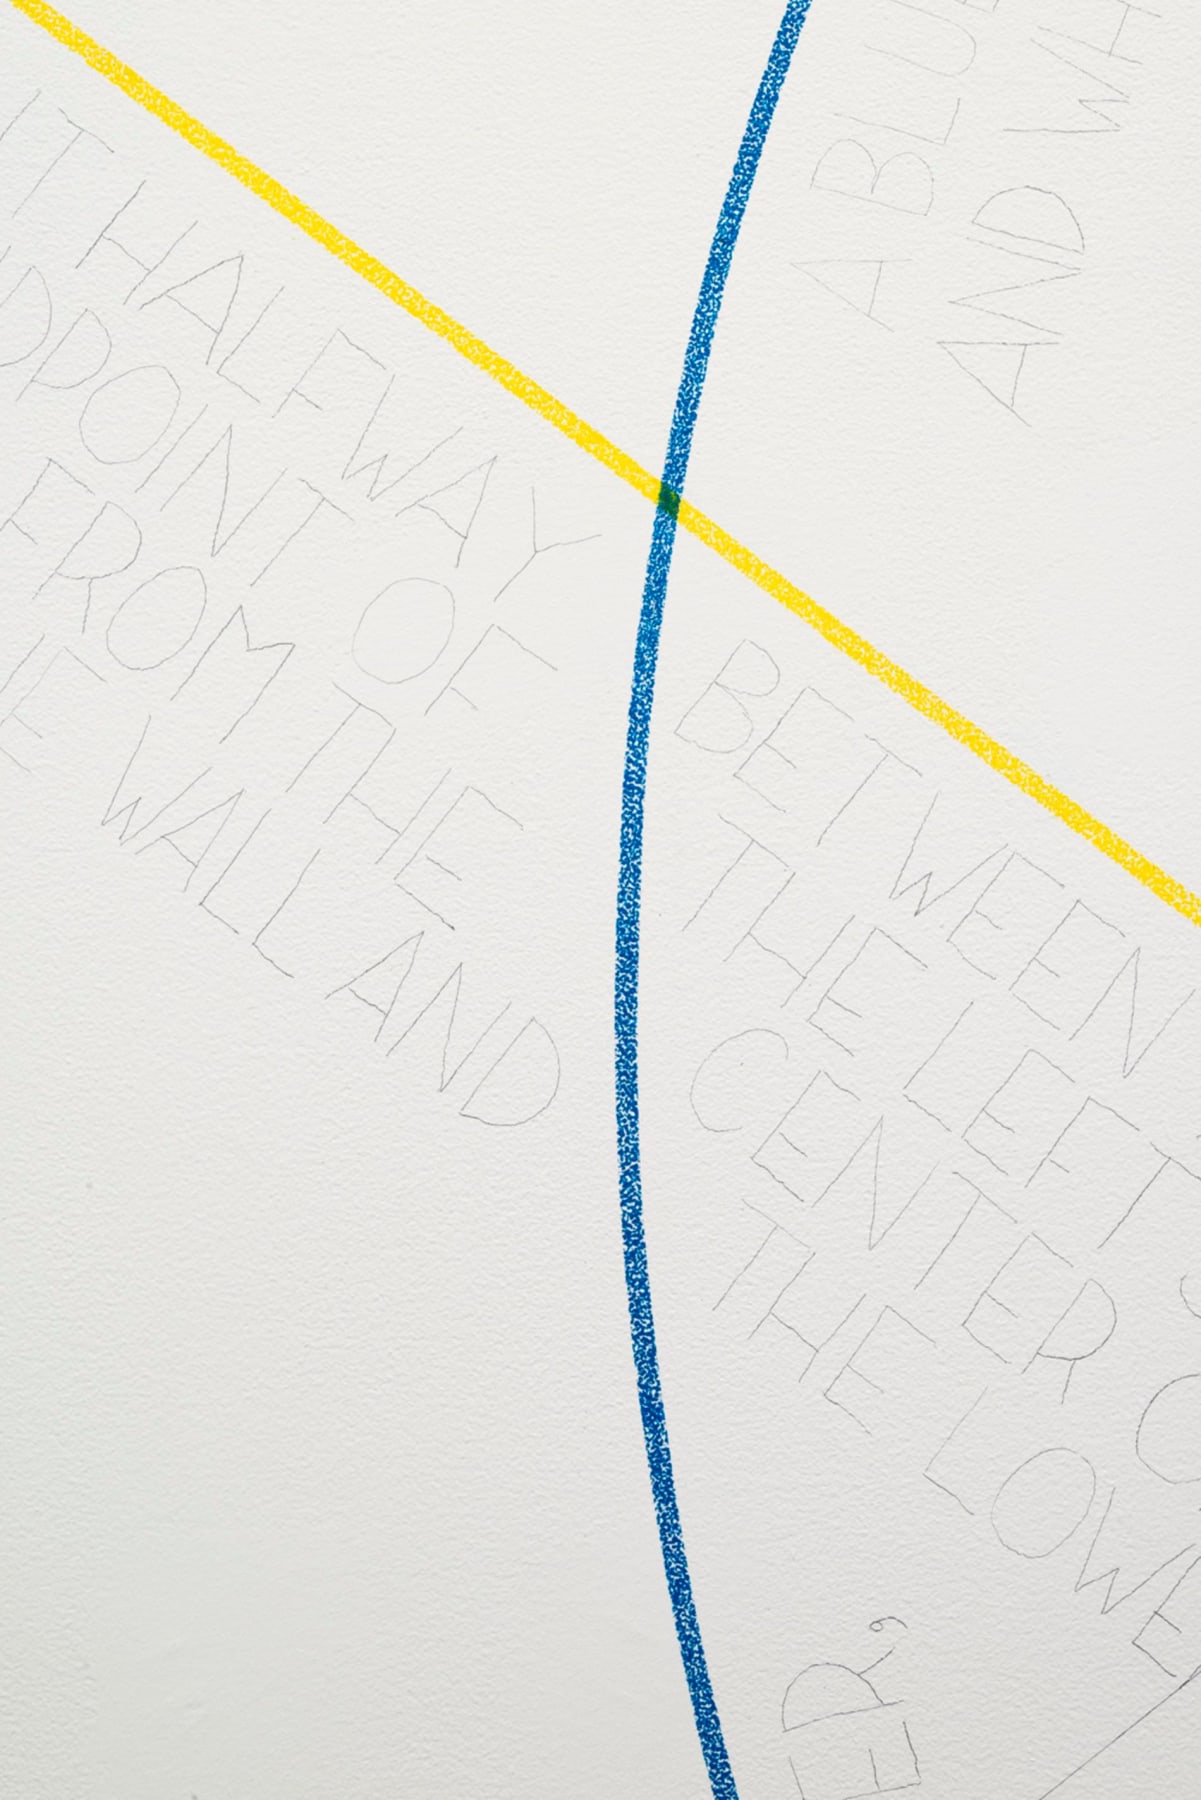 straight, yellow line and a curved, blue line with text surrounding it drawn directly on the wall